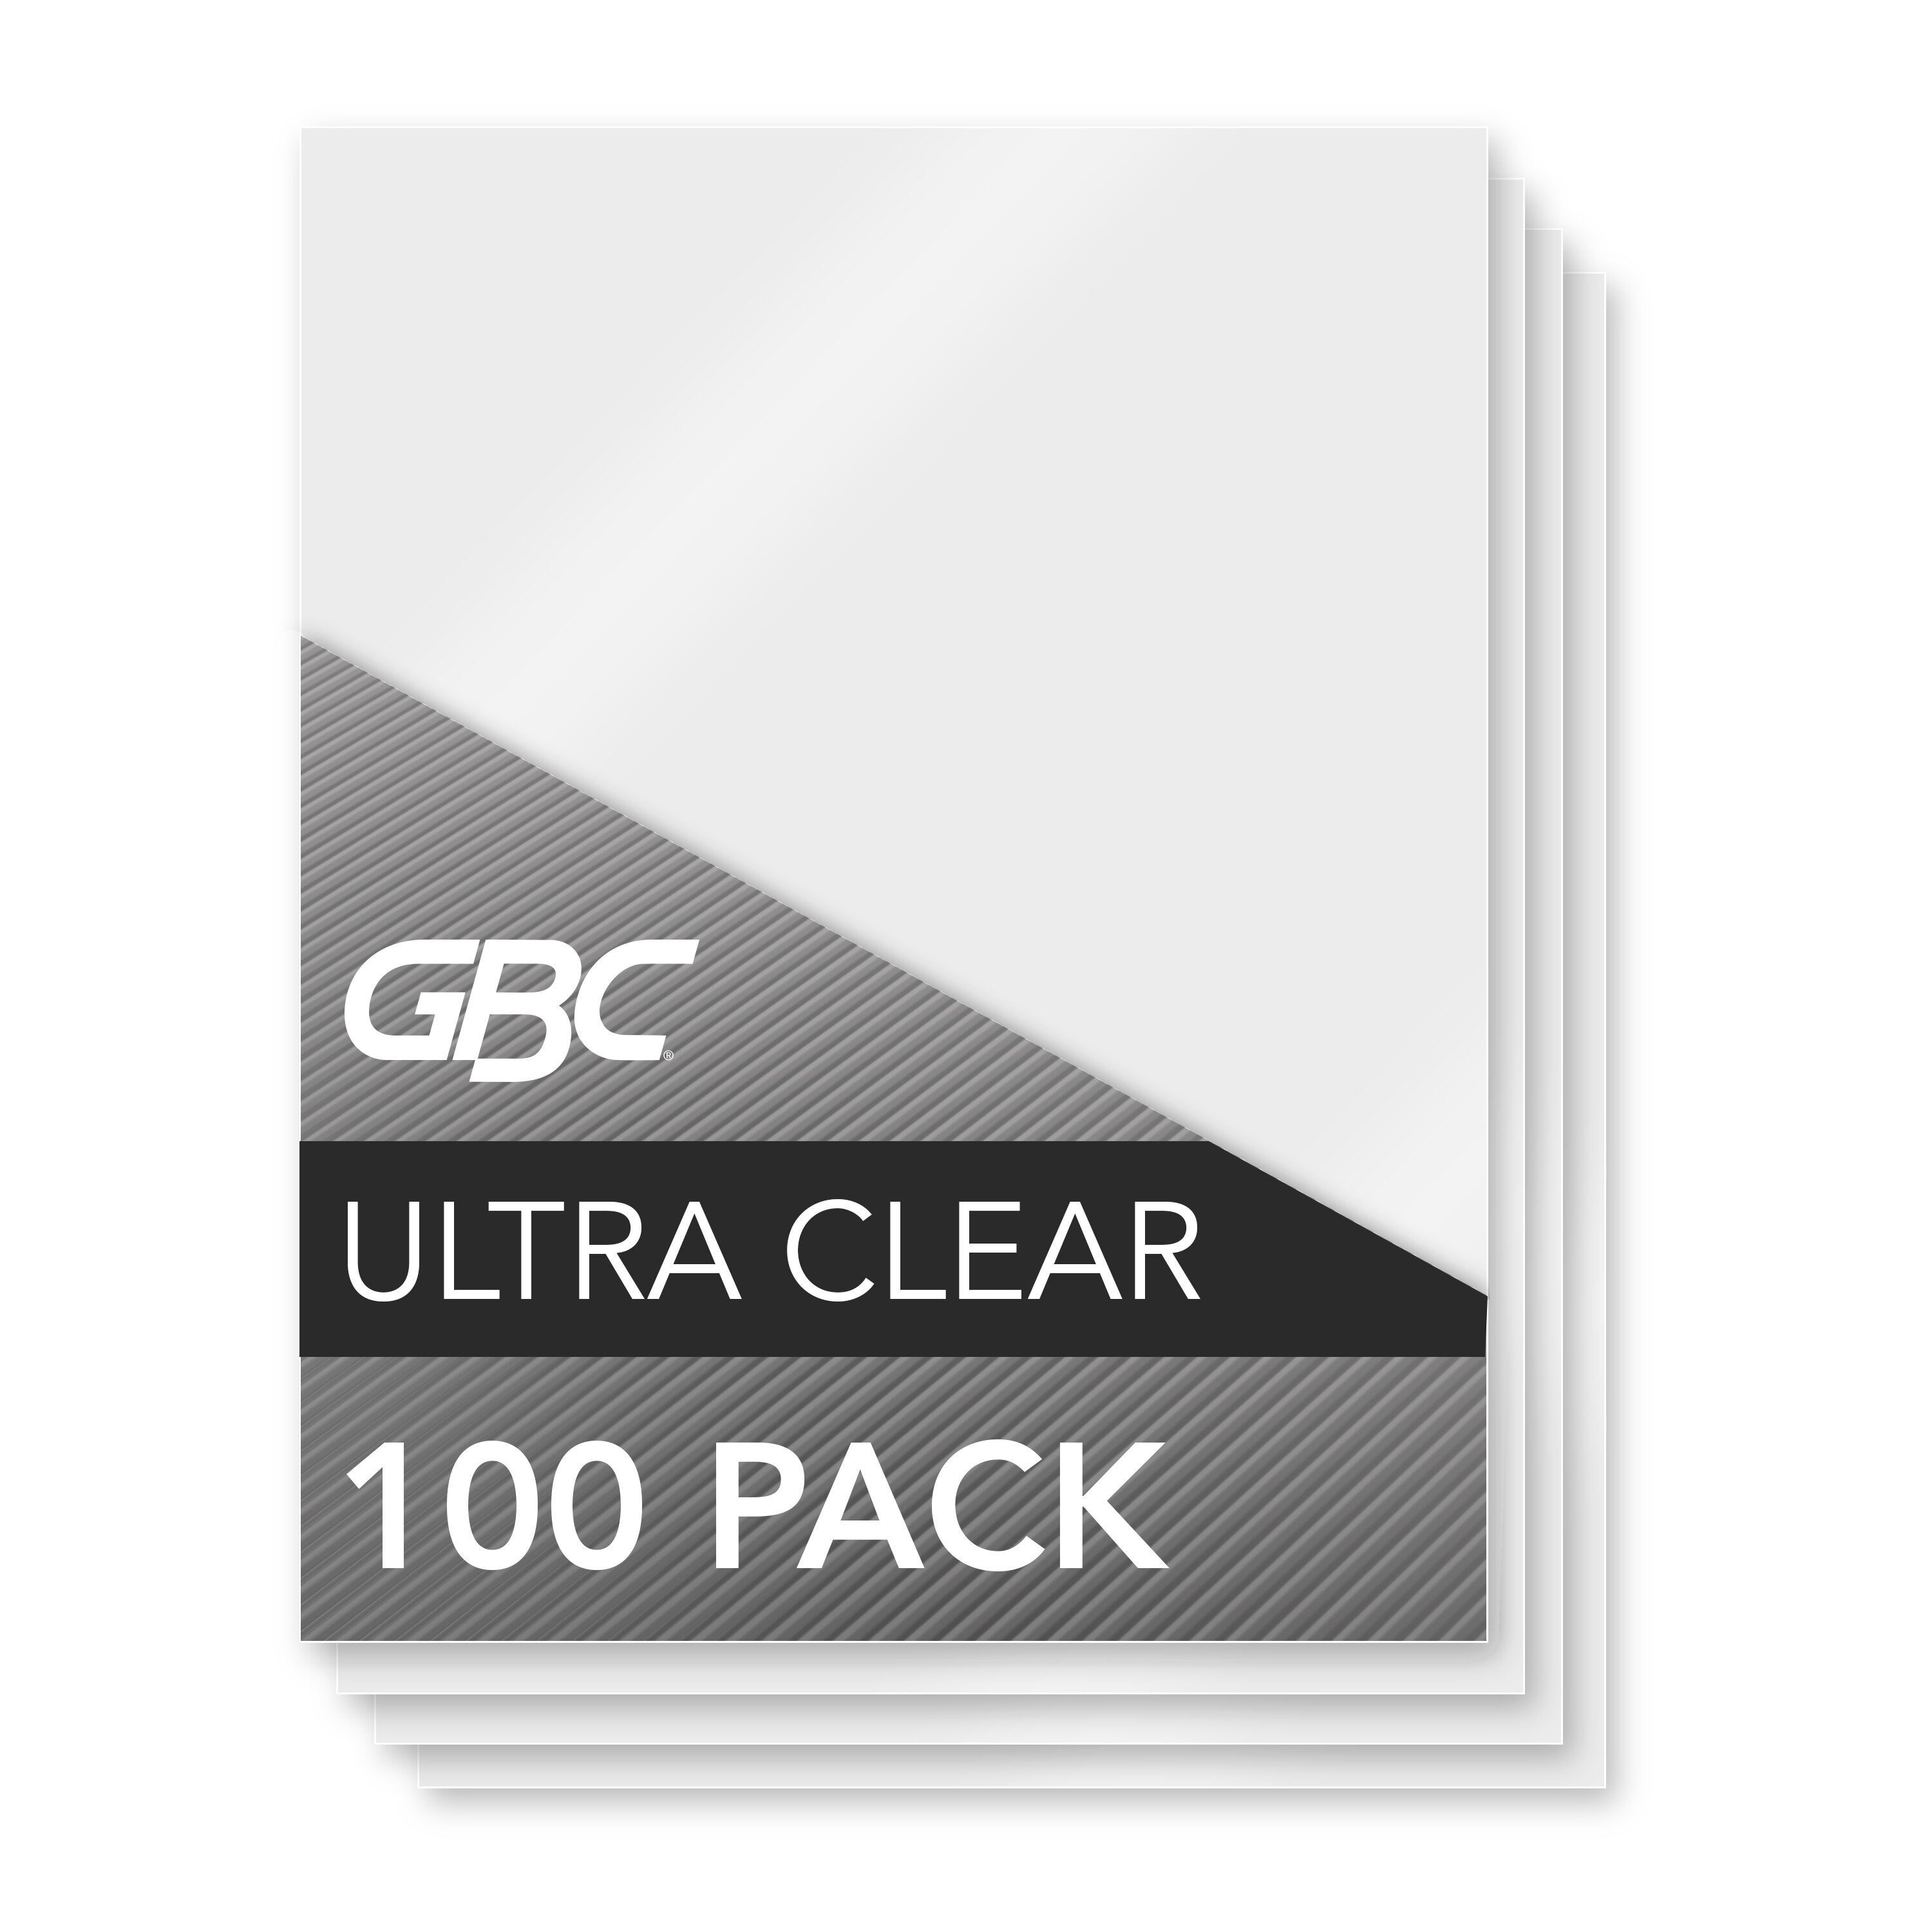 GBC Ultra Clear Laminating Pouches, Speed Format, 3 mil, Letter Size, 100 Pack